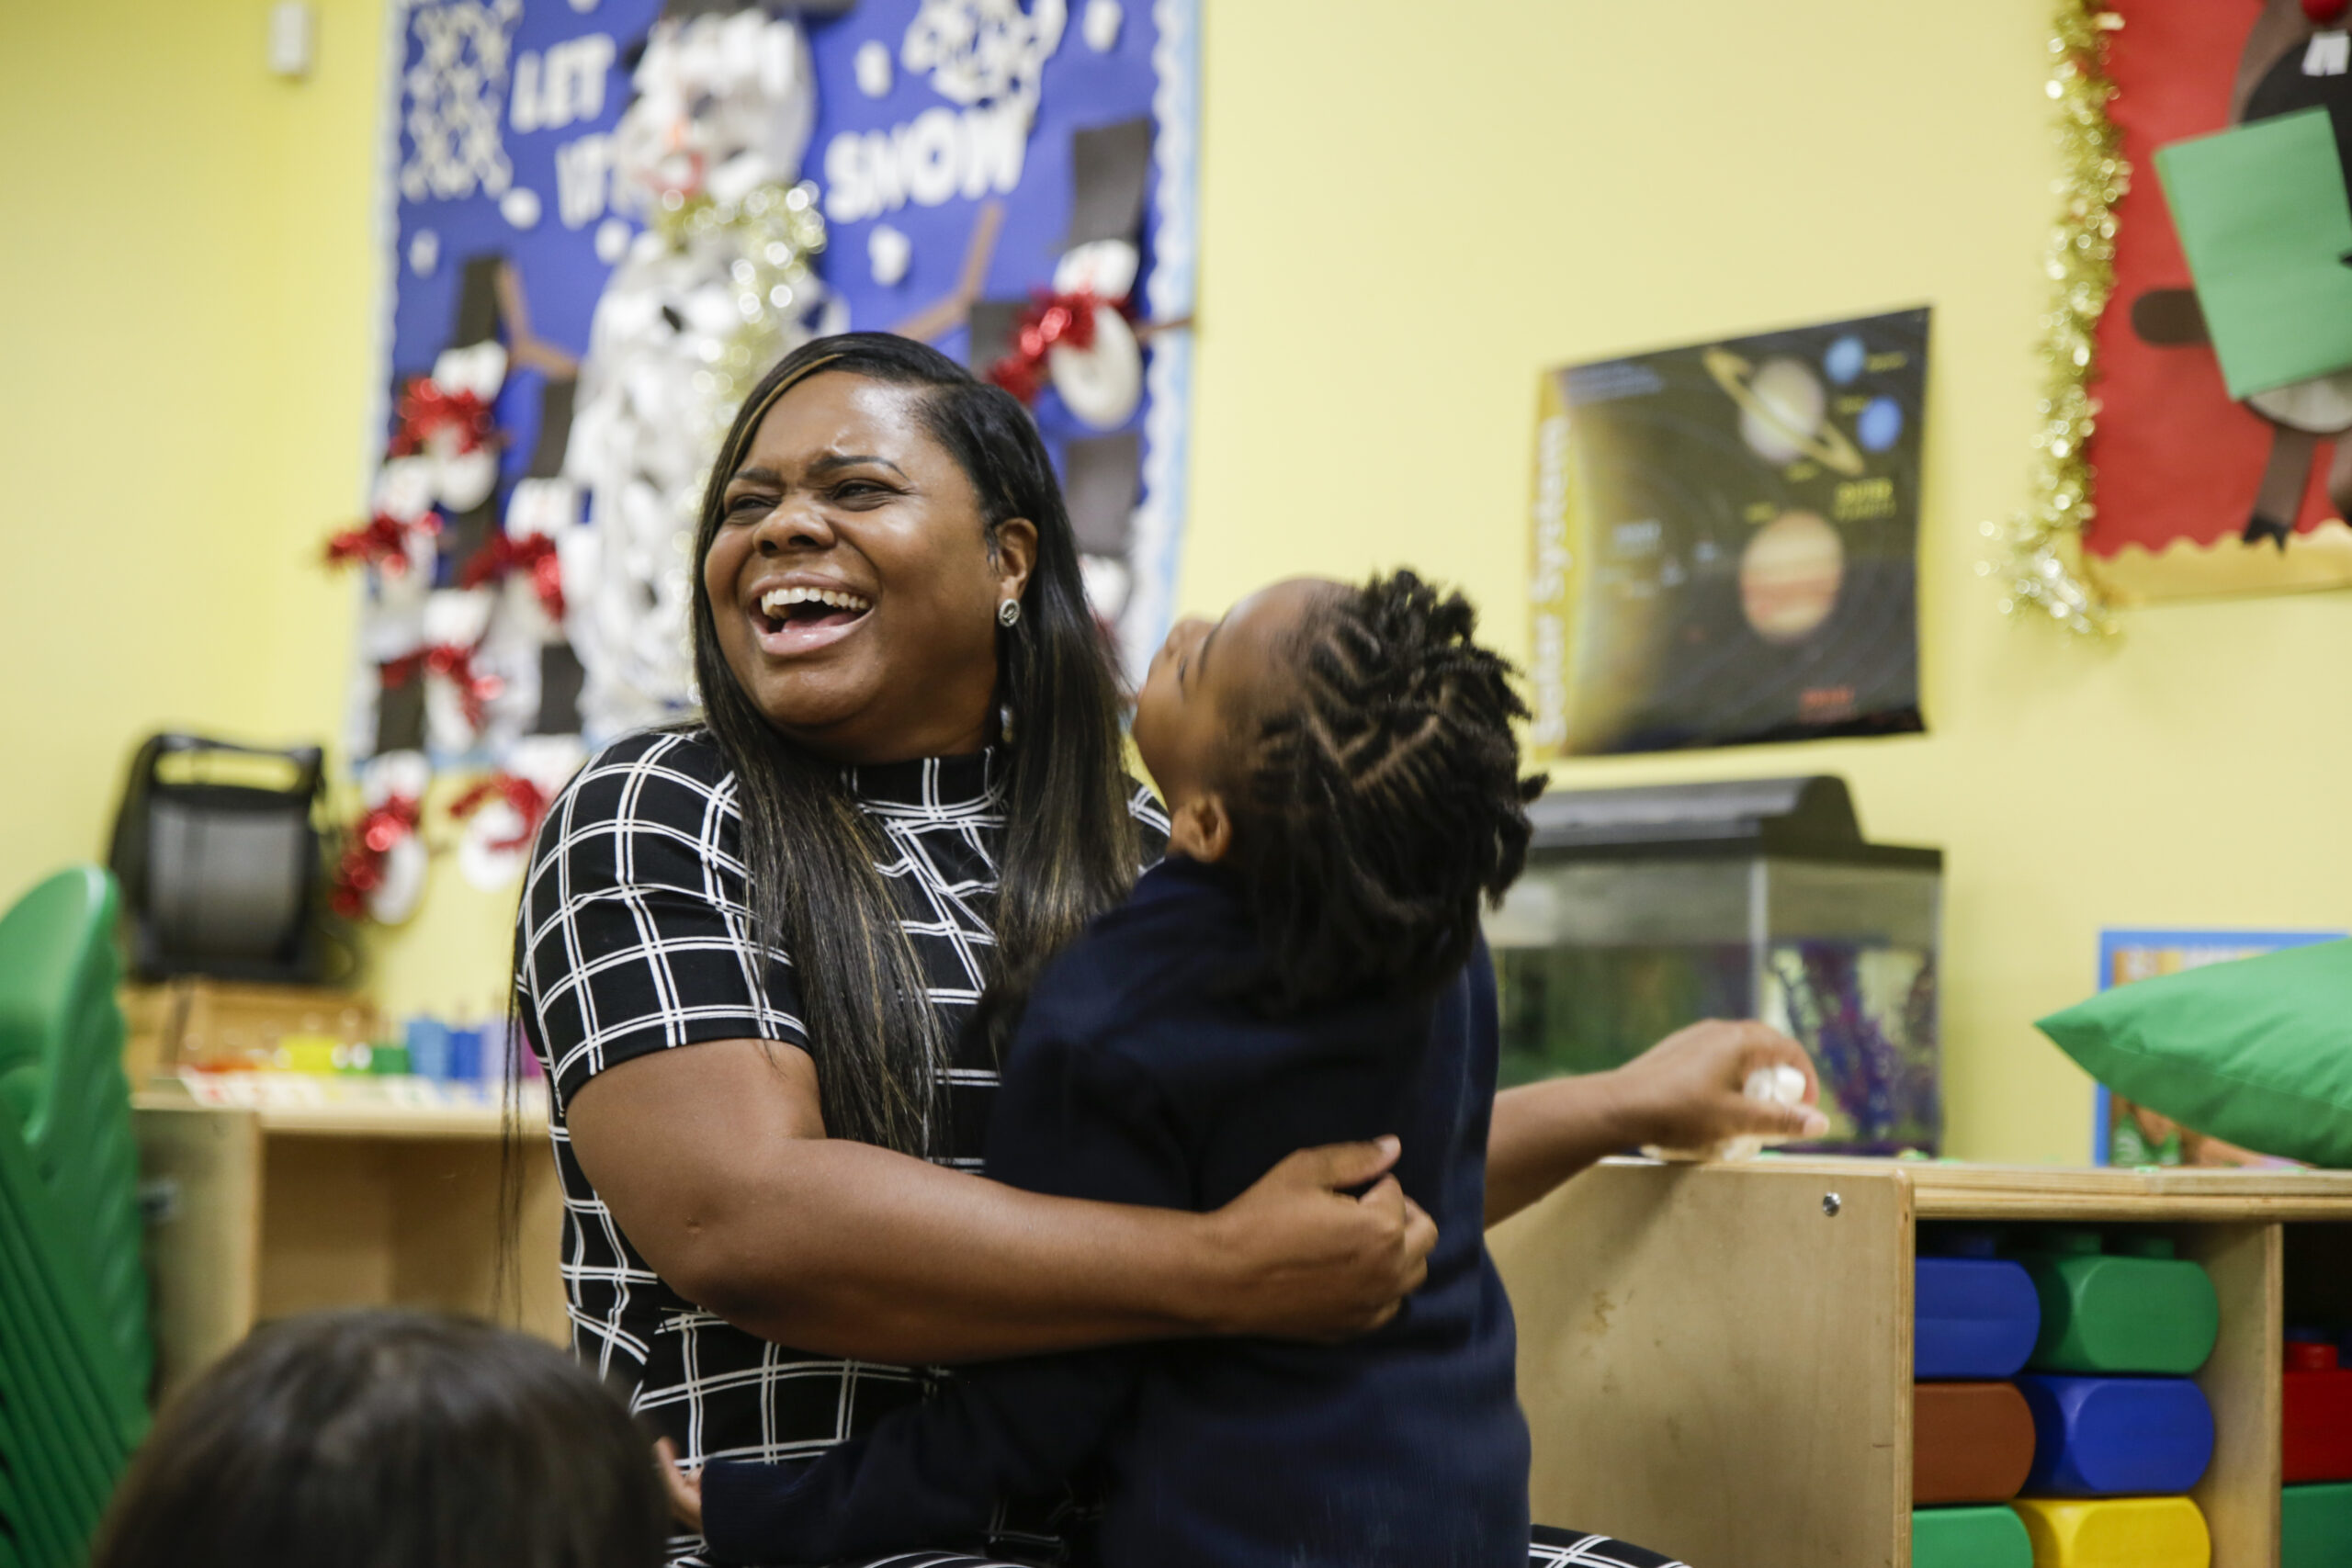 Tameki Warner, director of Learn Together Grow Together, sits smiling in a chair at story time with a child in her arms.